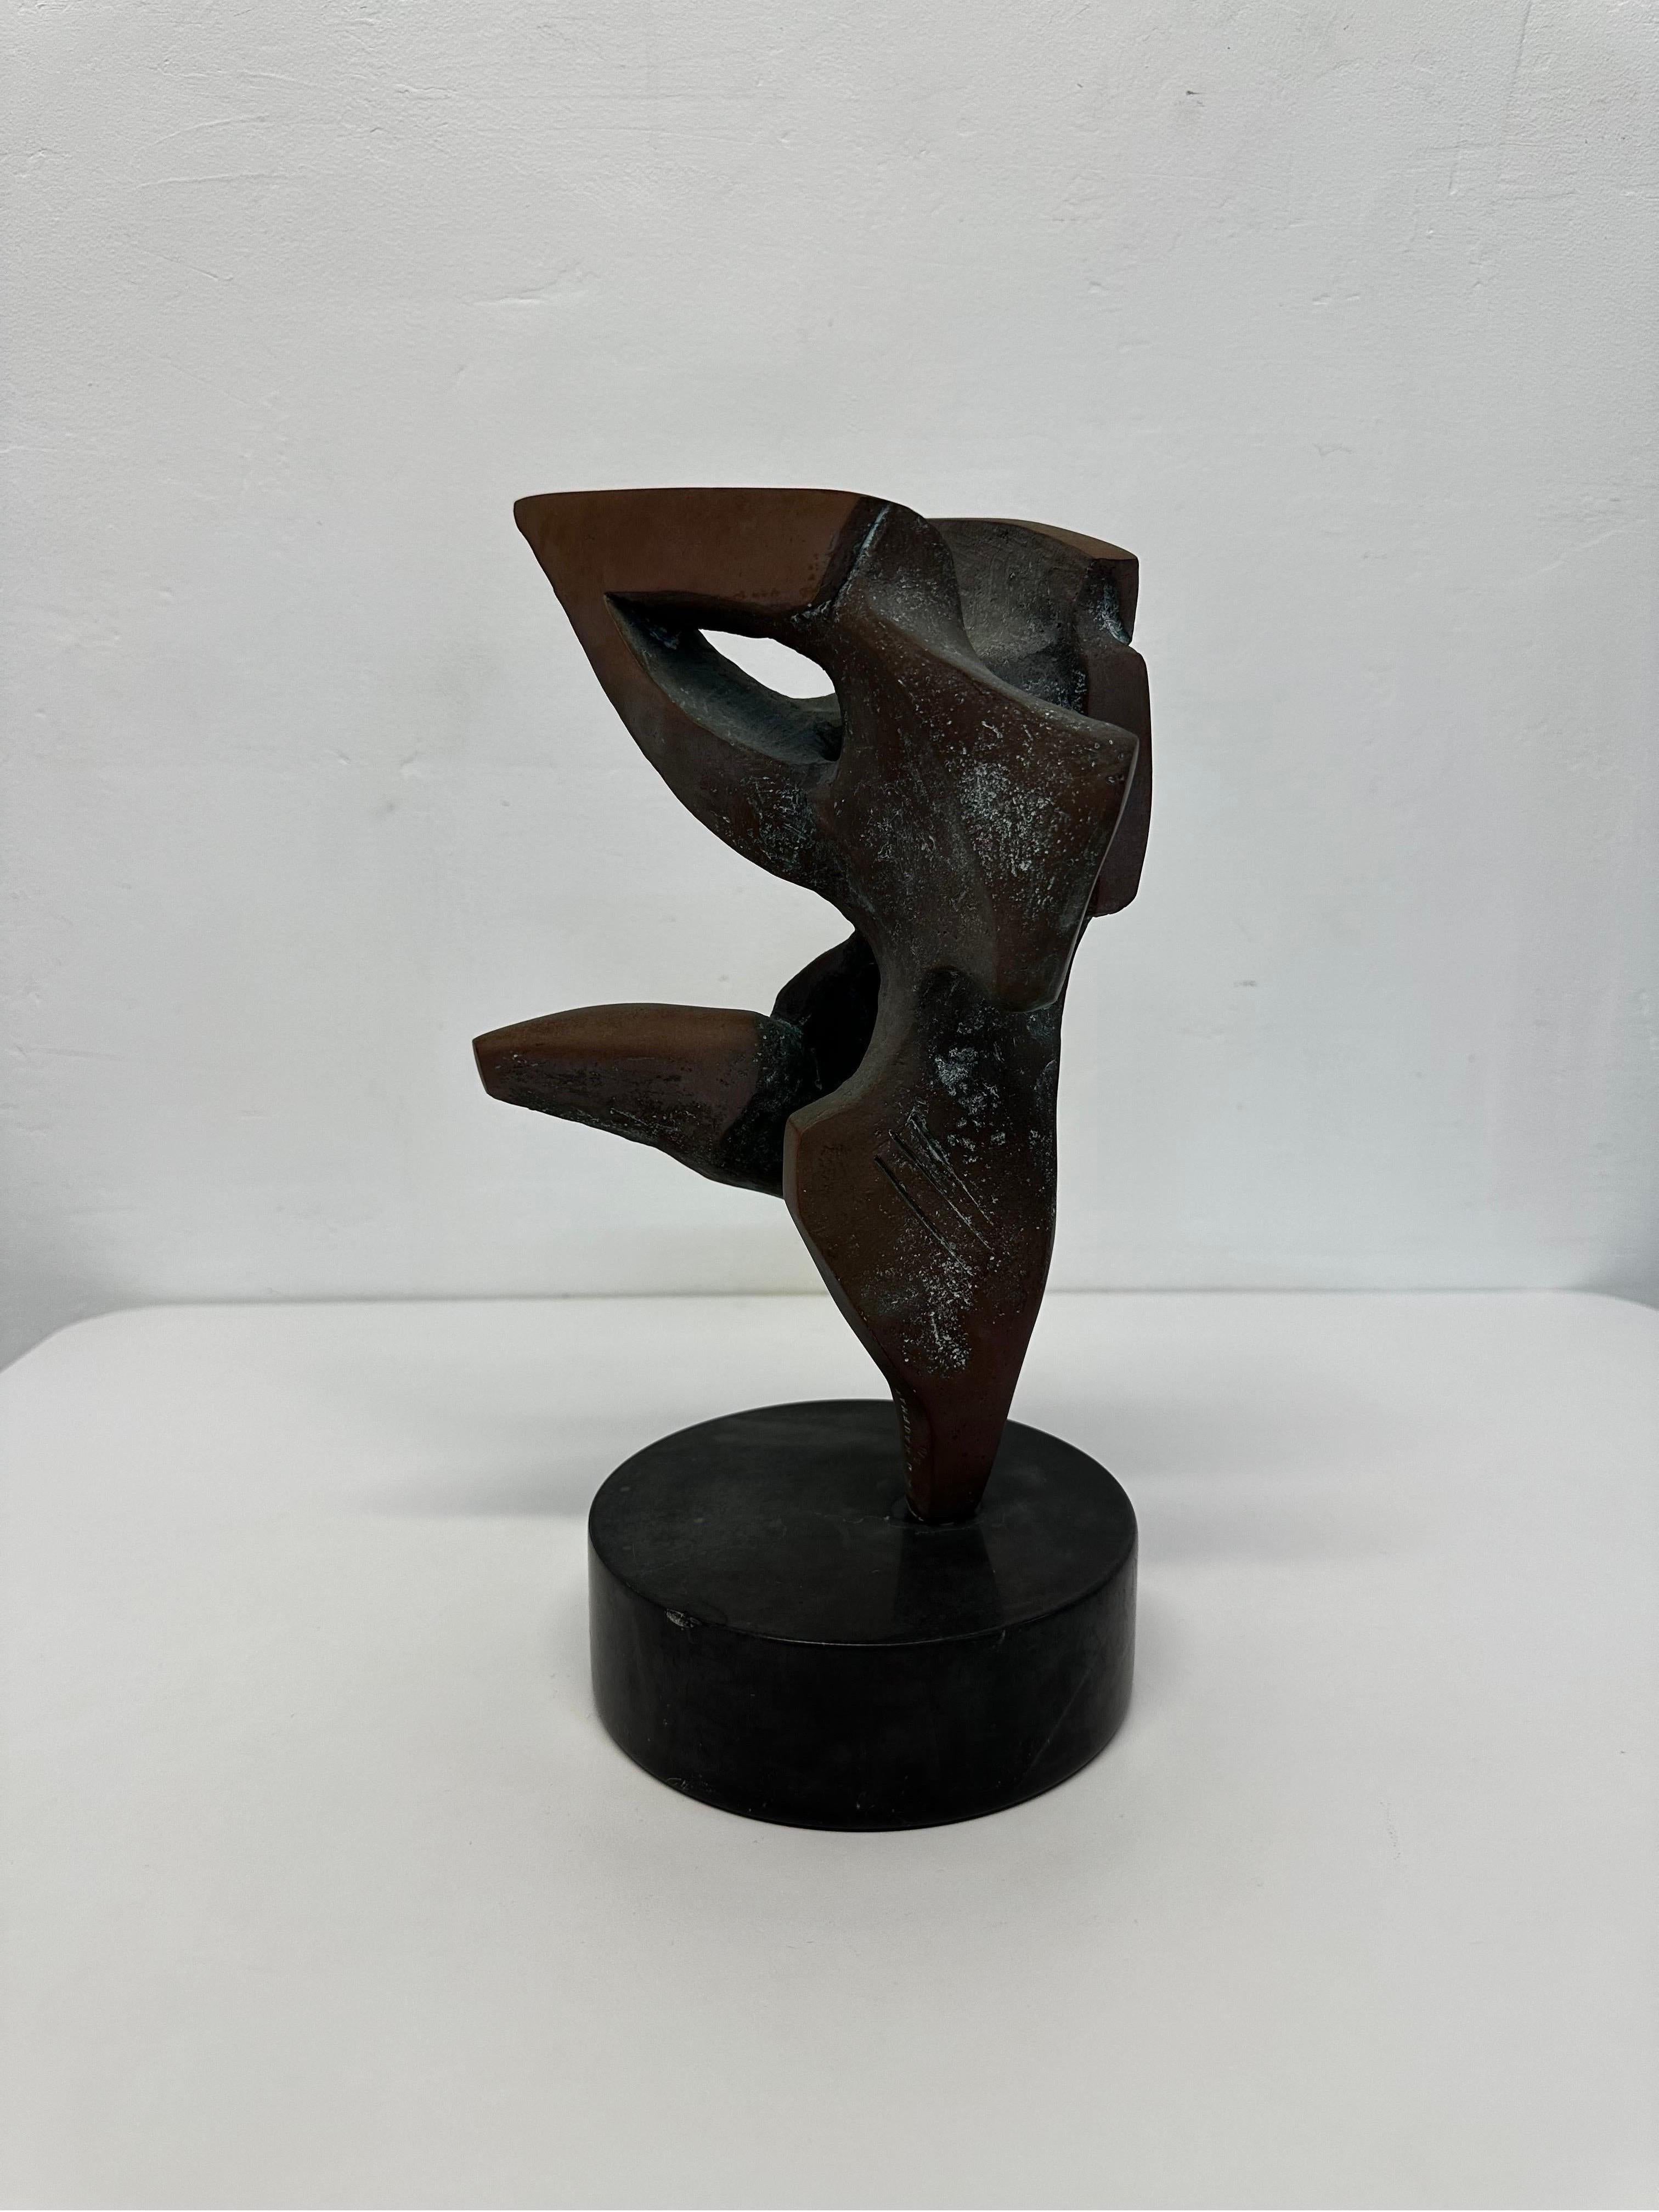 Abstract sculpture of a dancer using mixed metal copper and bronze.  The sculpture is affixed to a black granite base.  Signed and numbered.